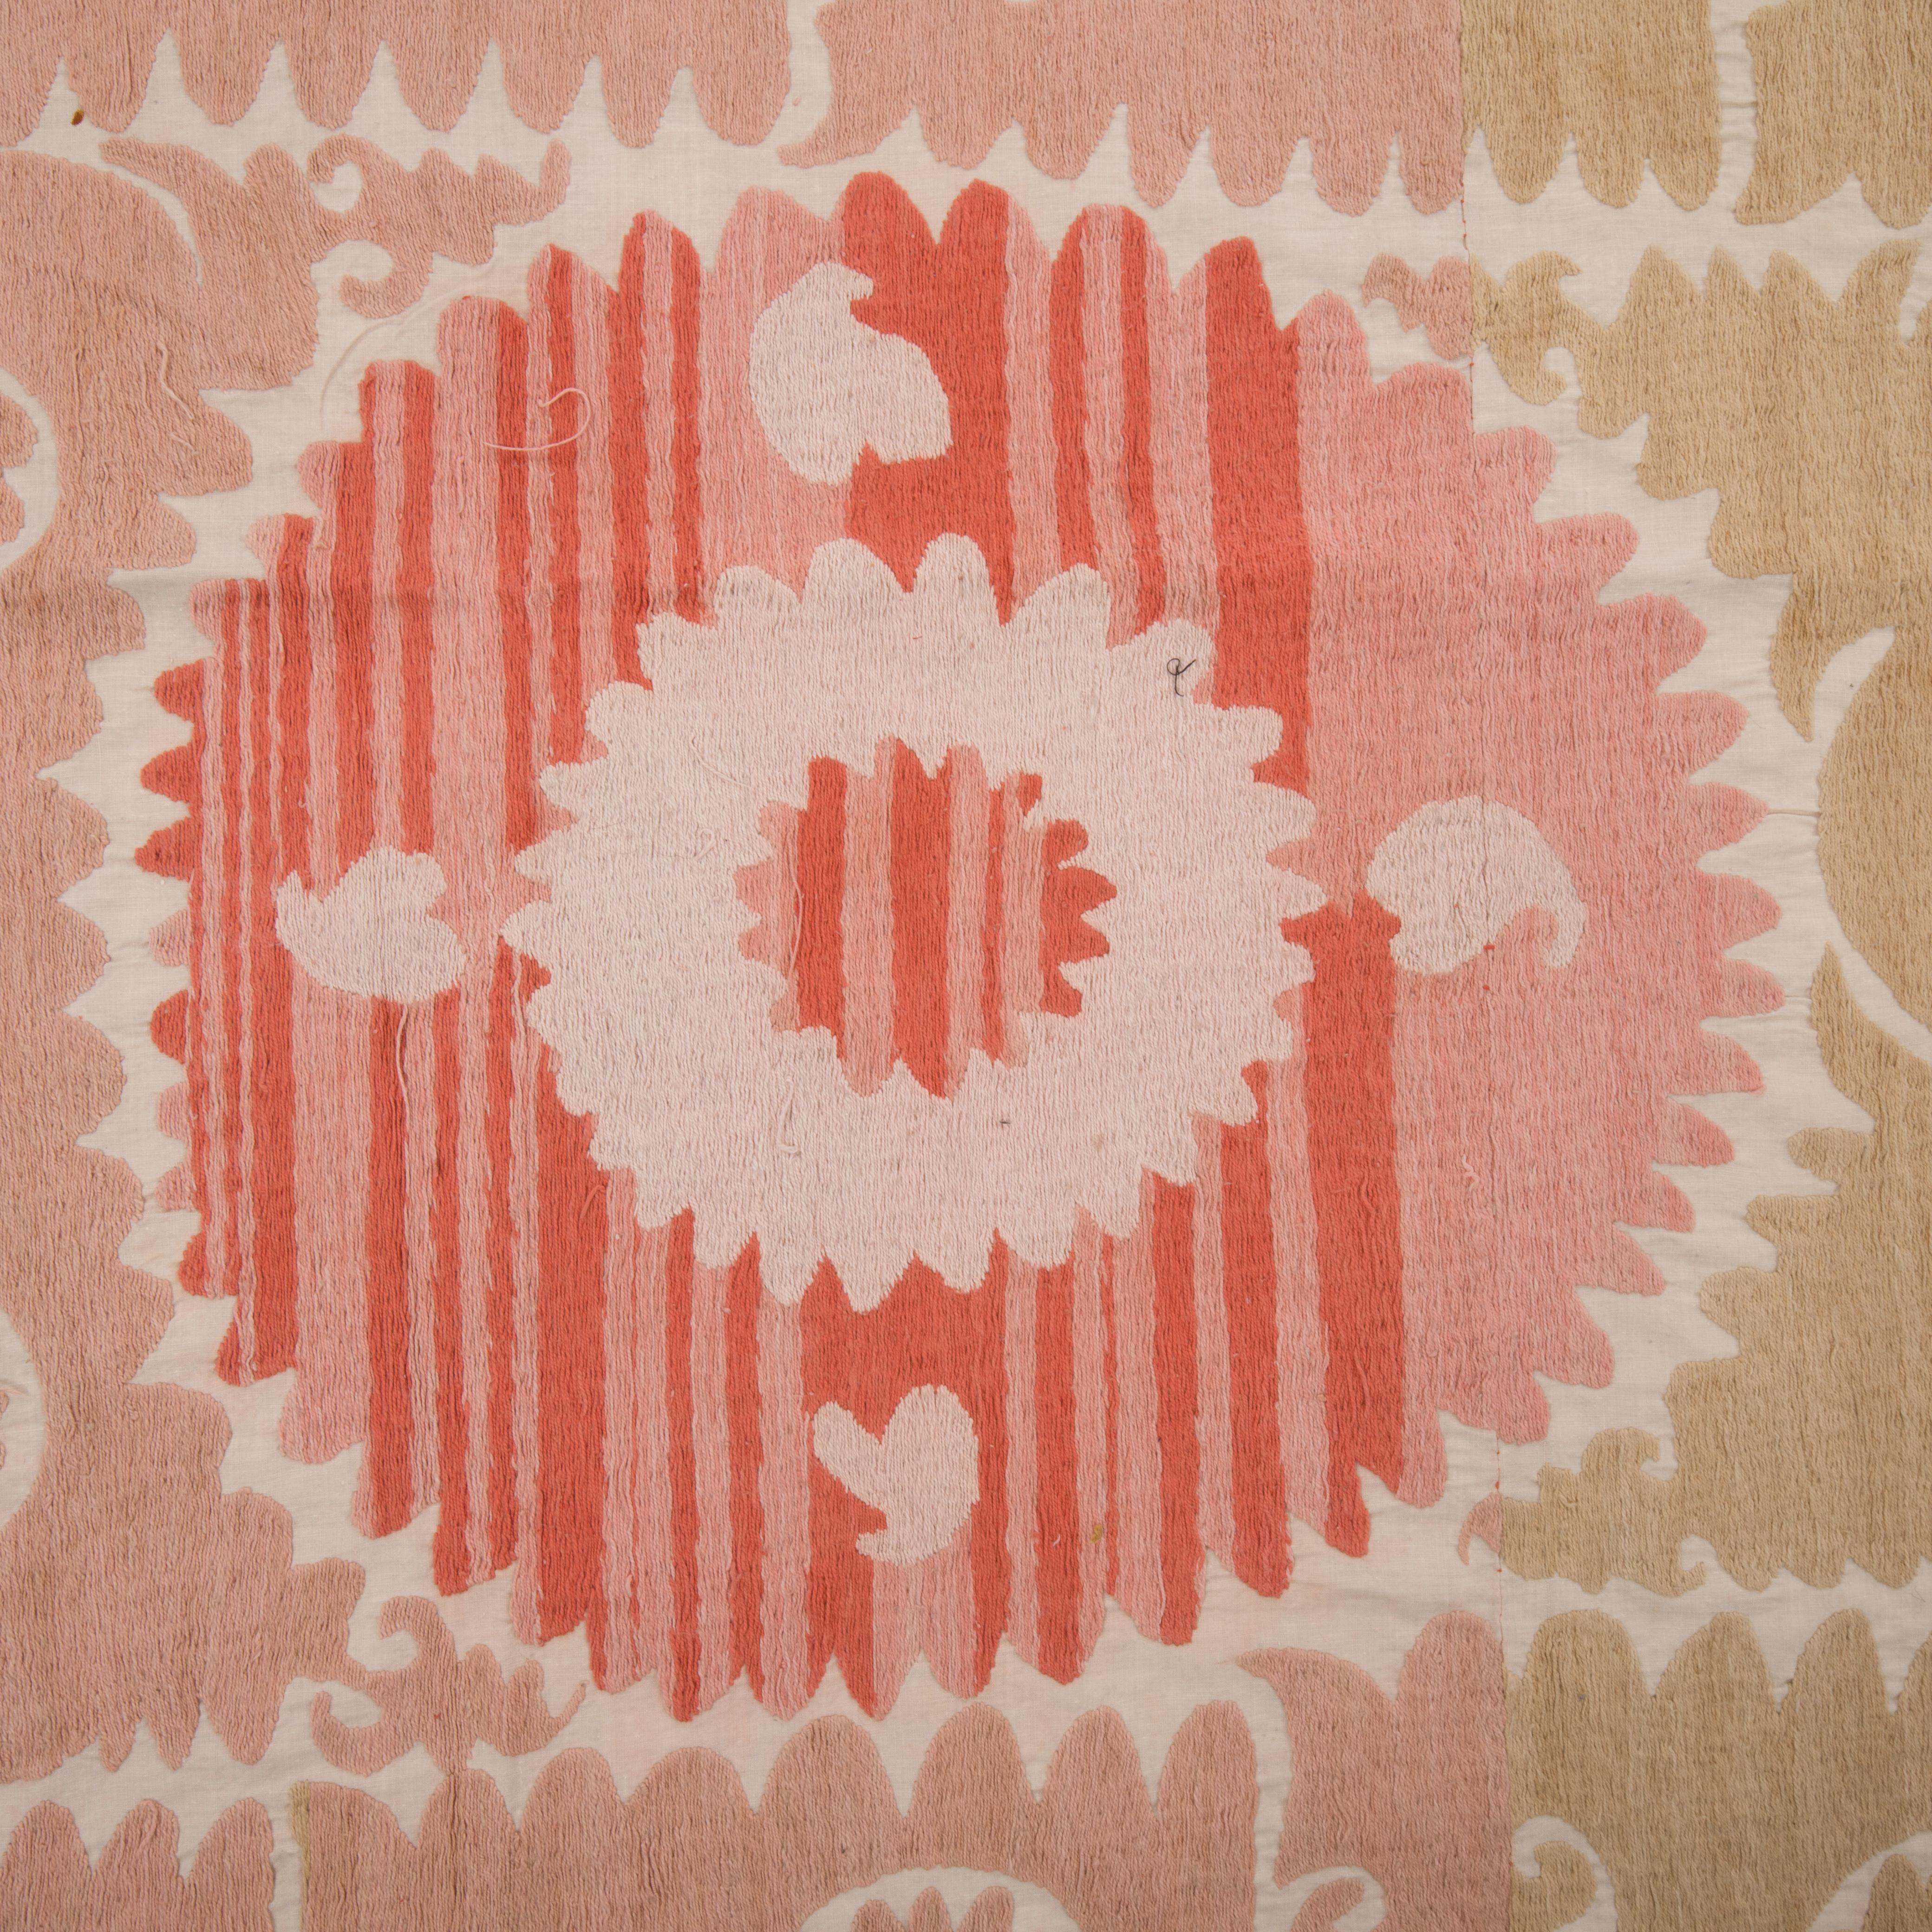 20th Century Decorative Mid-20th C. Neutral Samarkand Suzani with Pinks For Sale